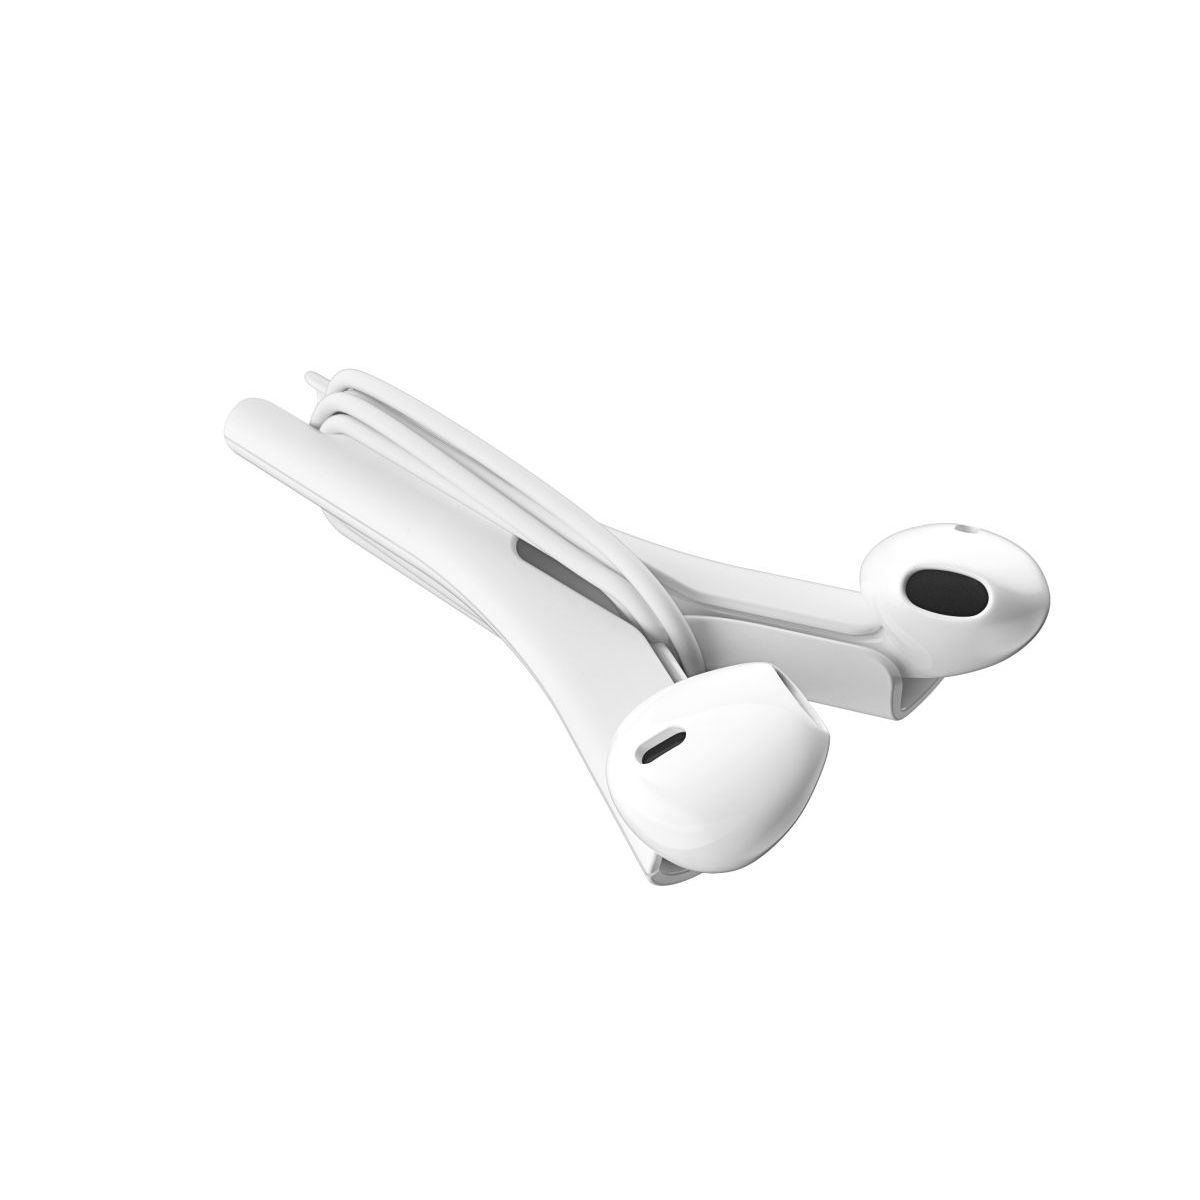 HIP TWIG headphone cord anti tangler for iPhone and Samsung - White